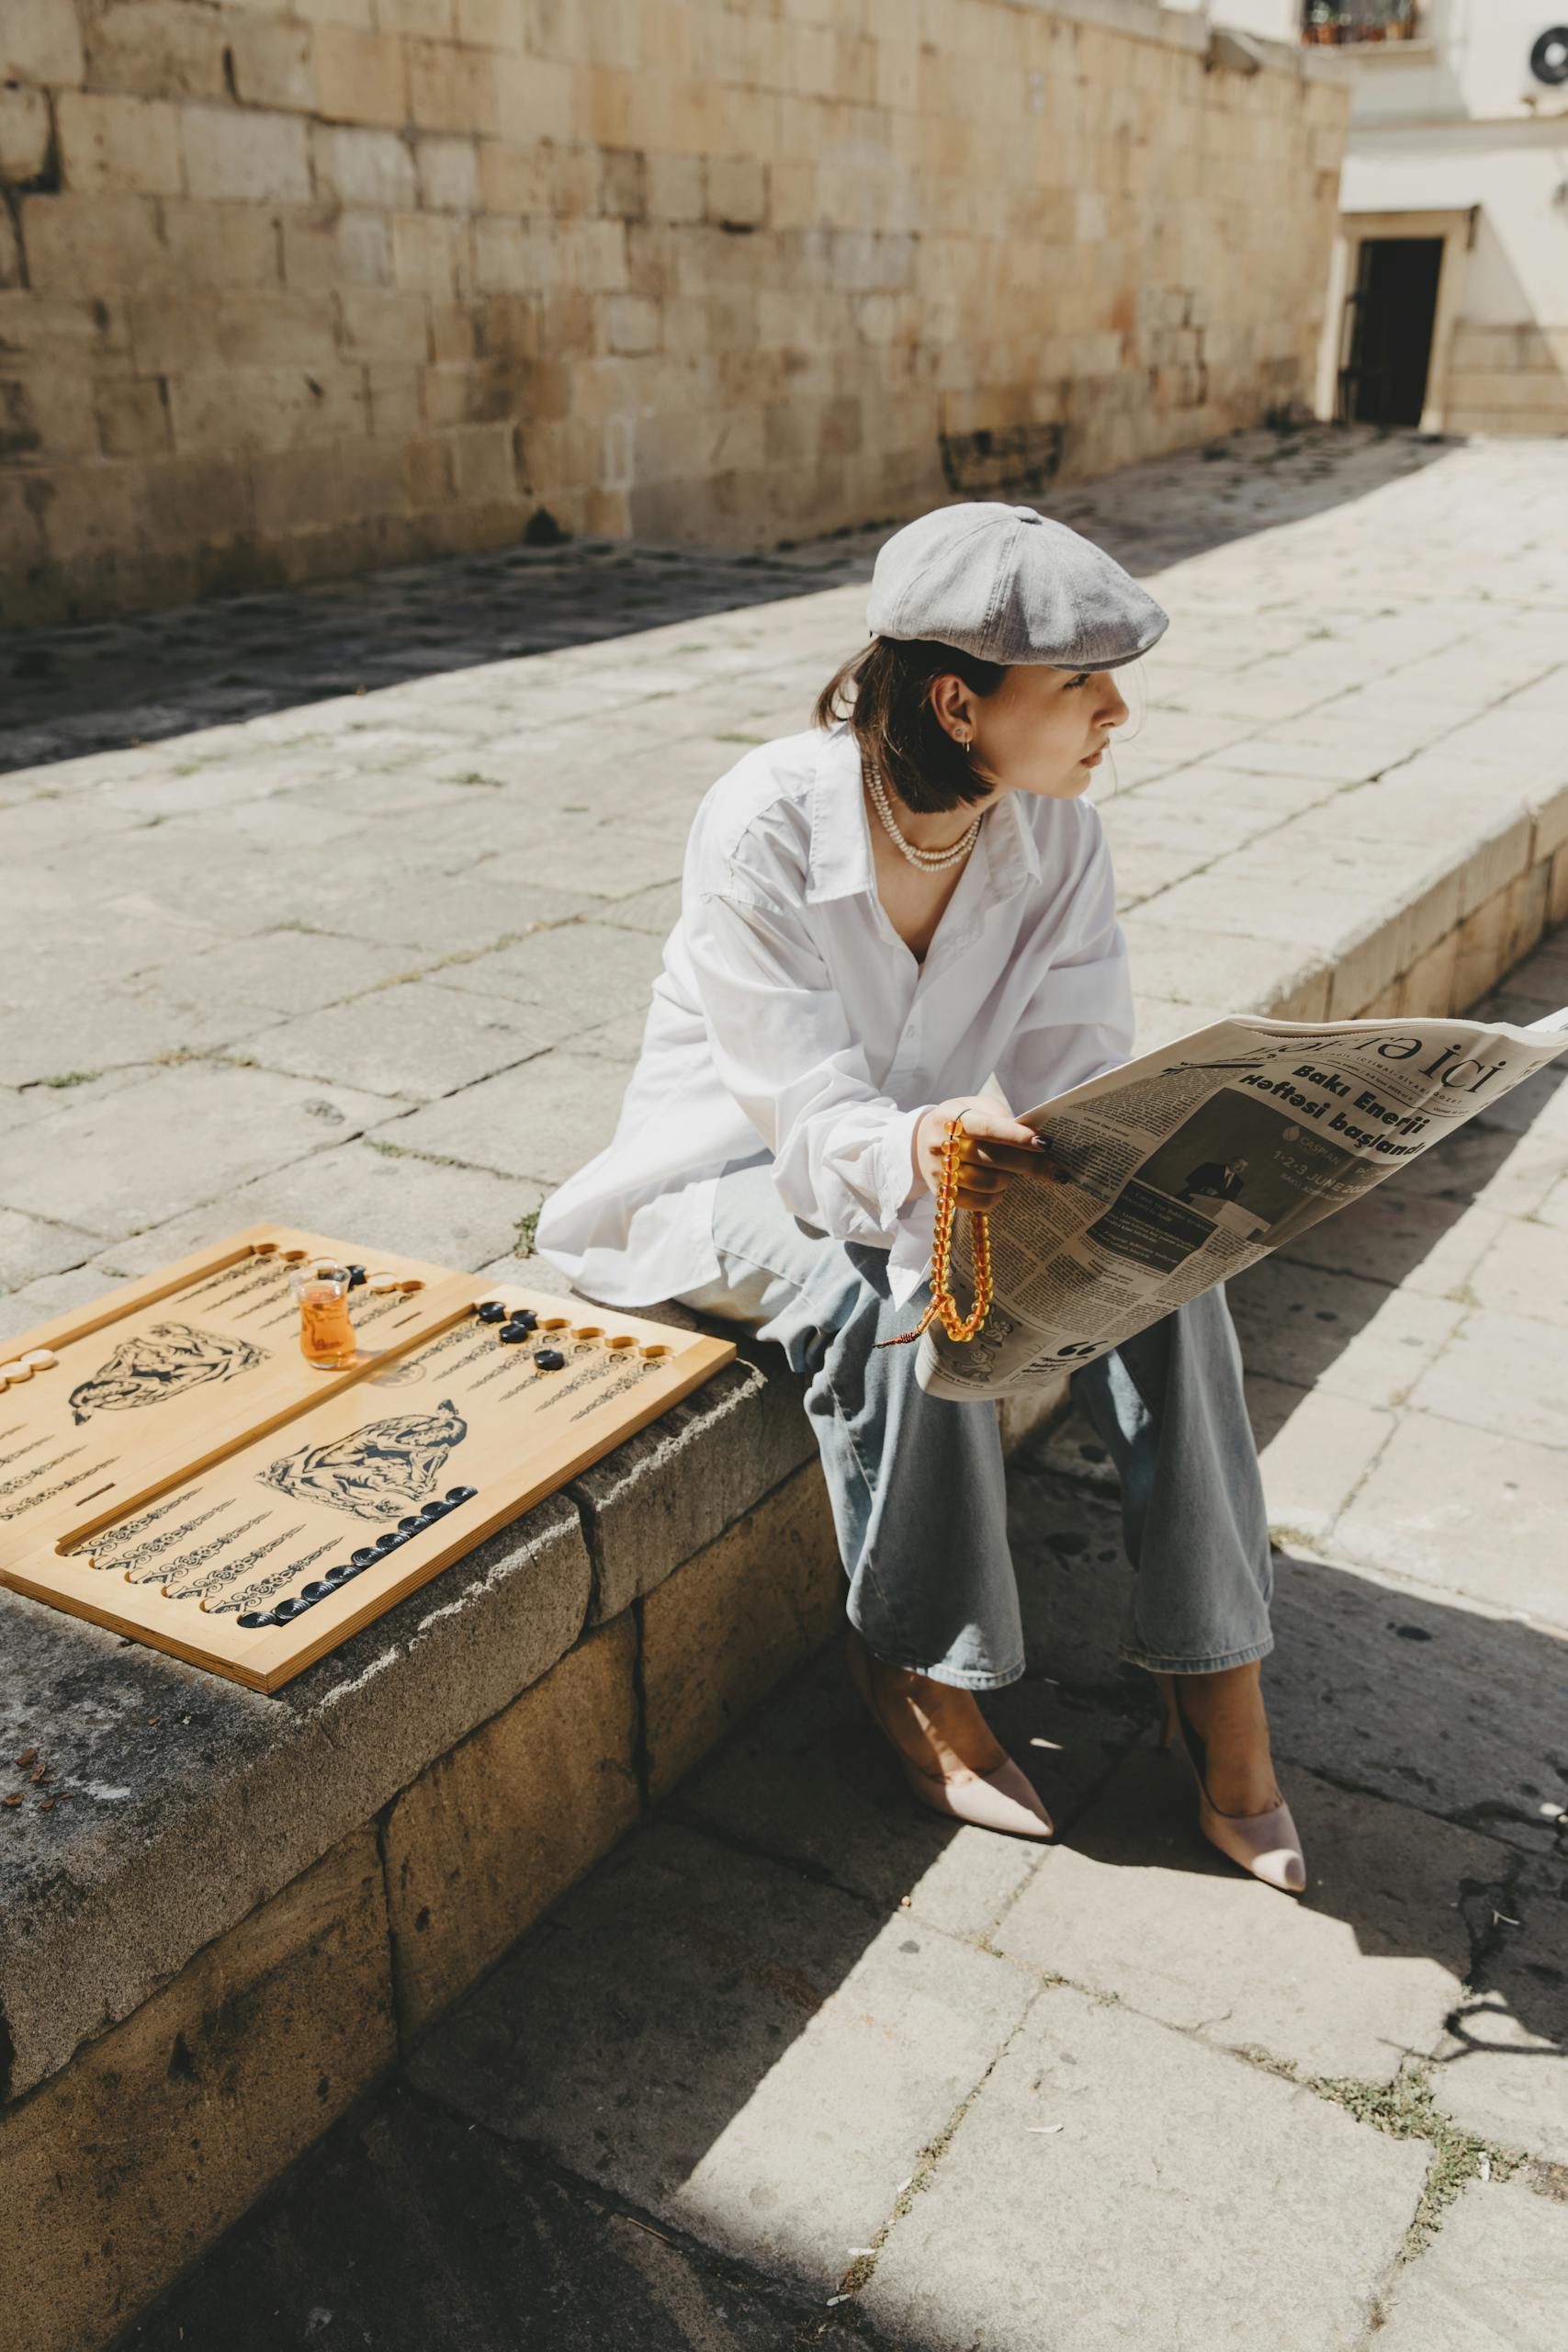 Brunette Woman in Beret and White Shit Sitting on Pavement with Newspaper in Hands